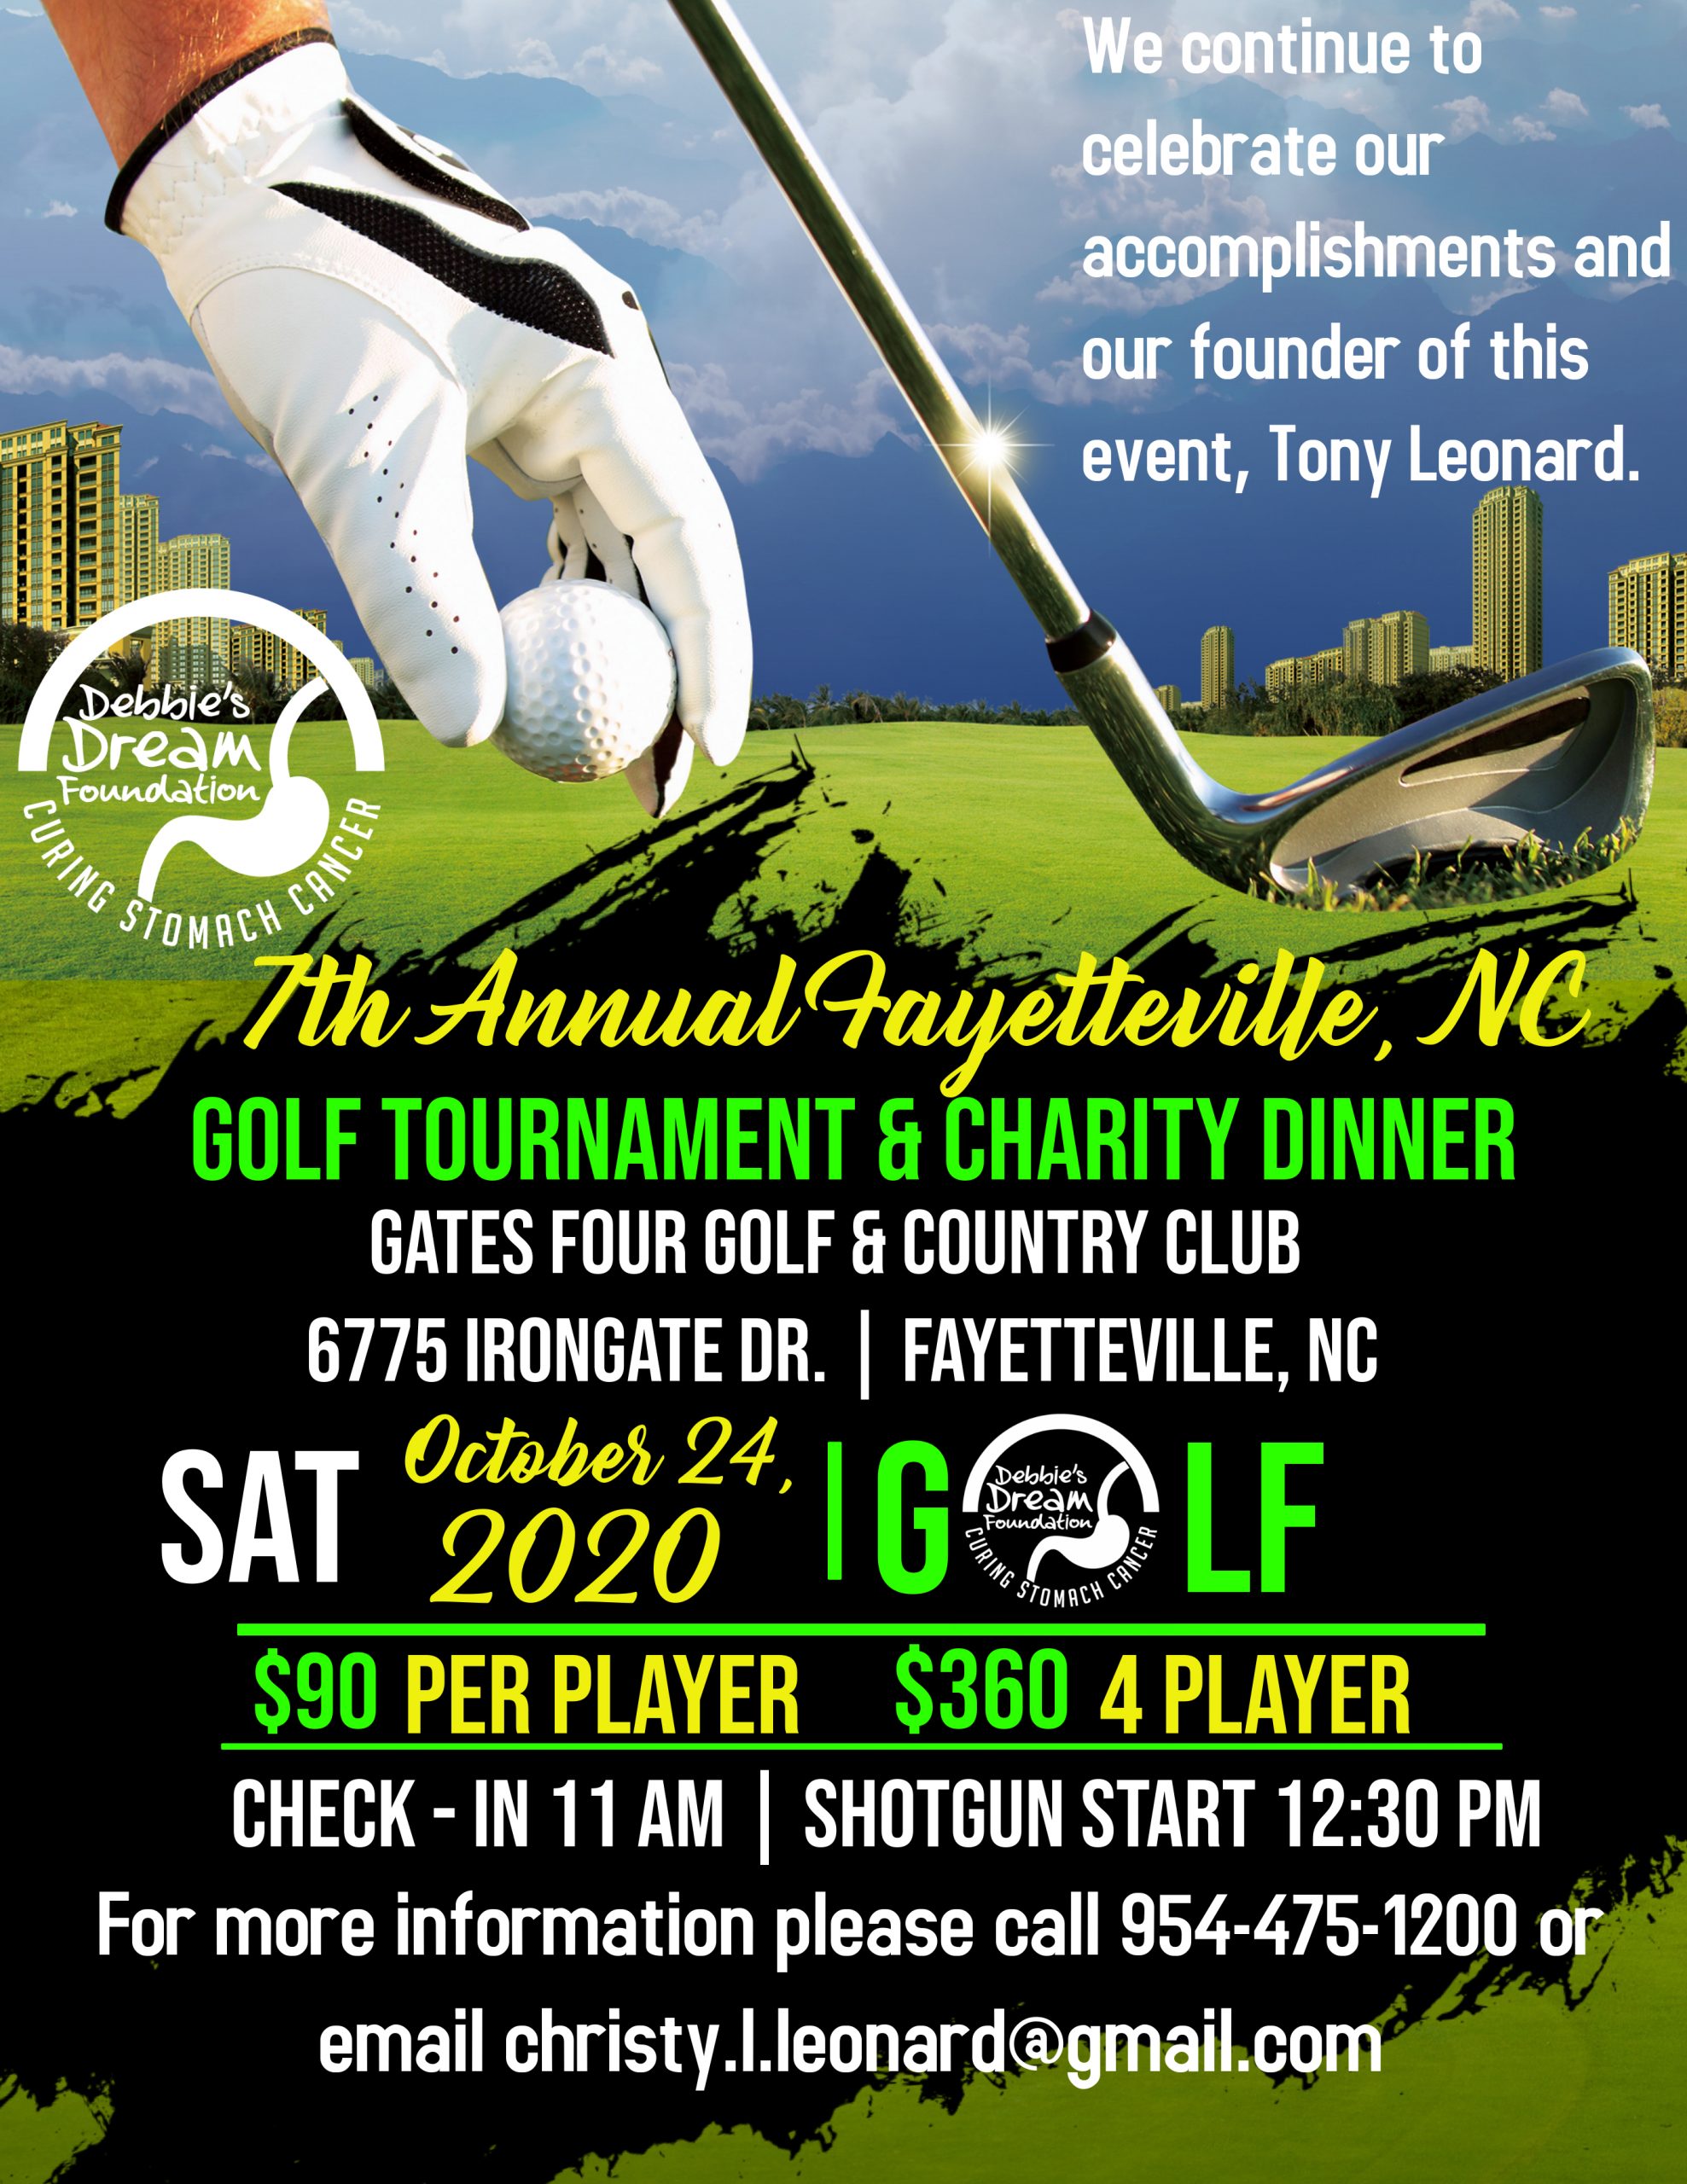 7th Annual Fayetteville, NC Golf Tournament & Charity Dinner Debbie's